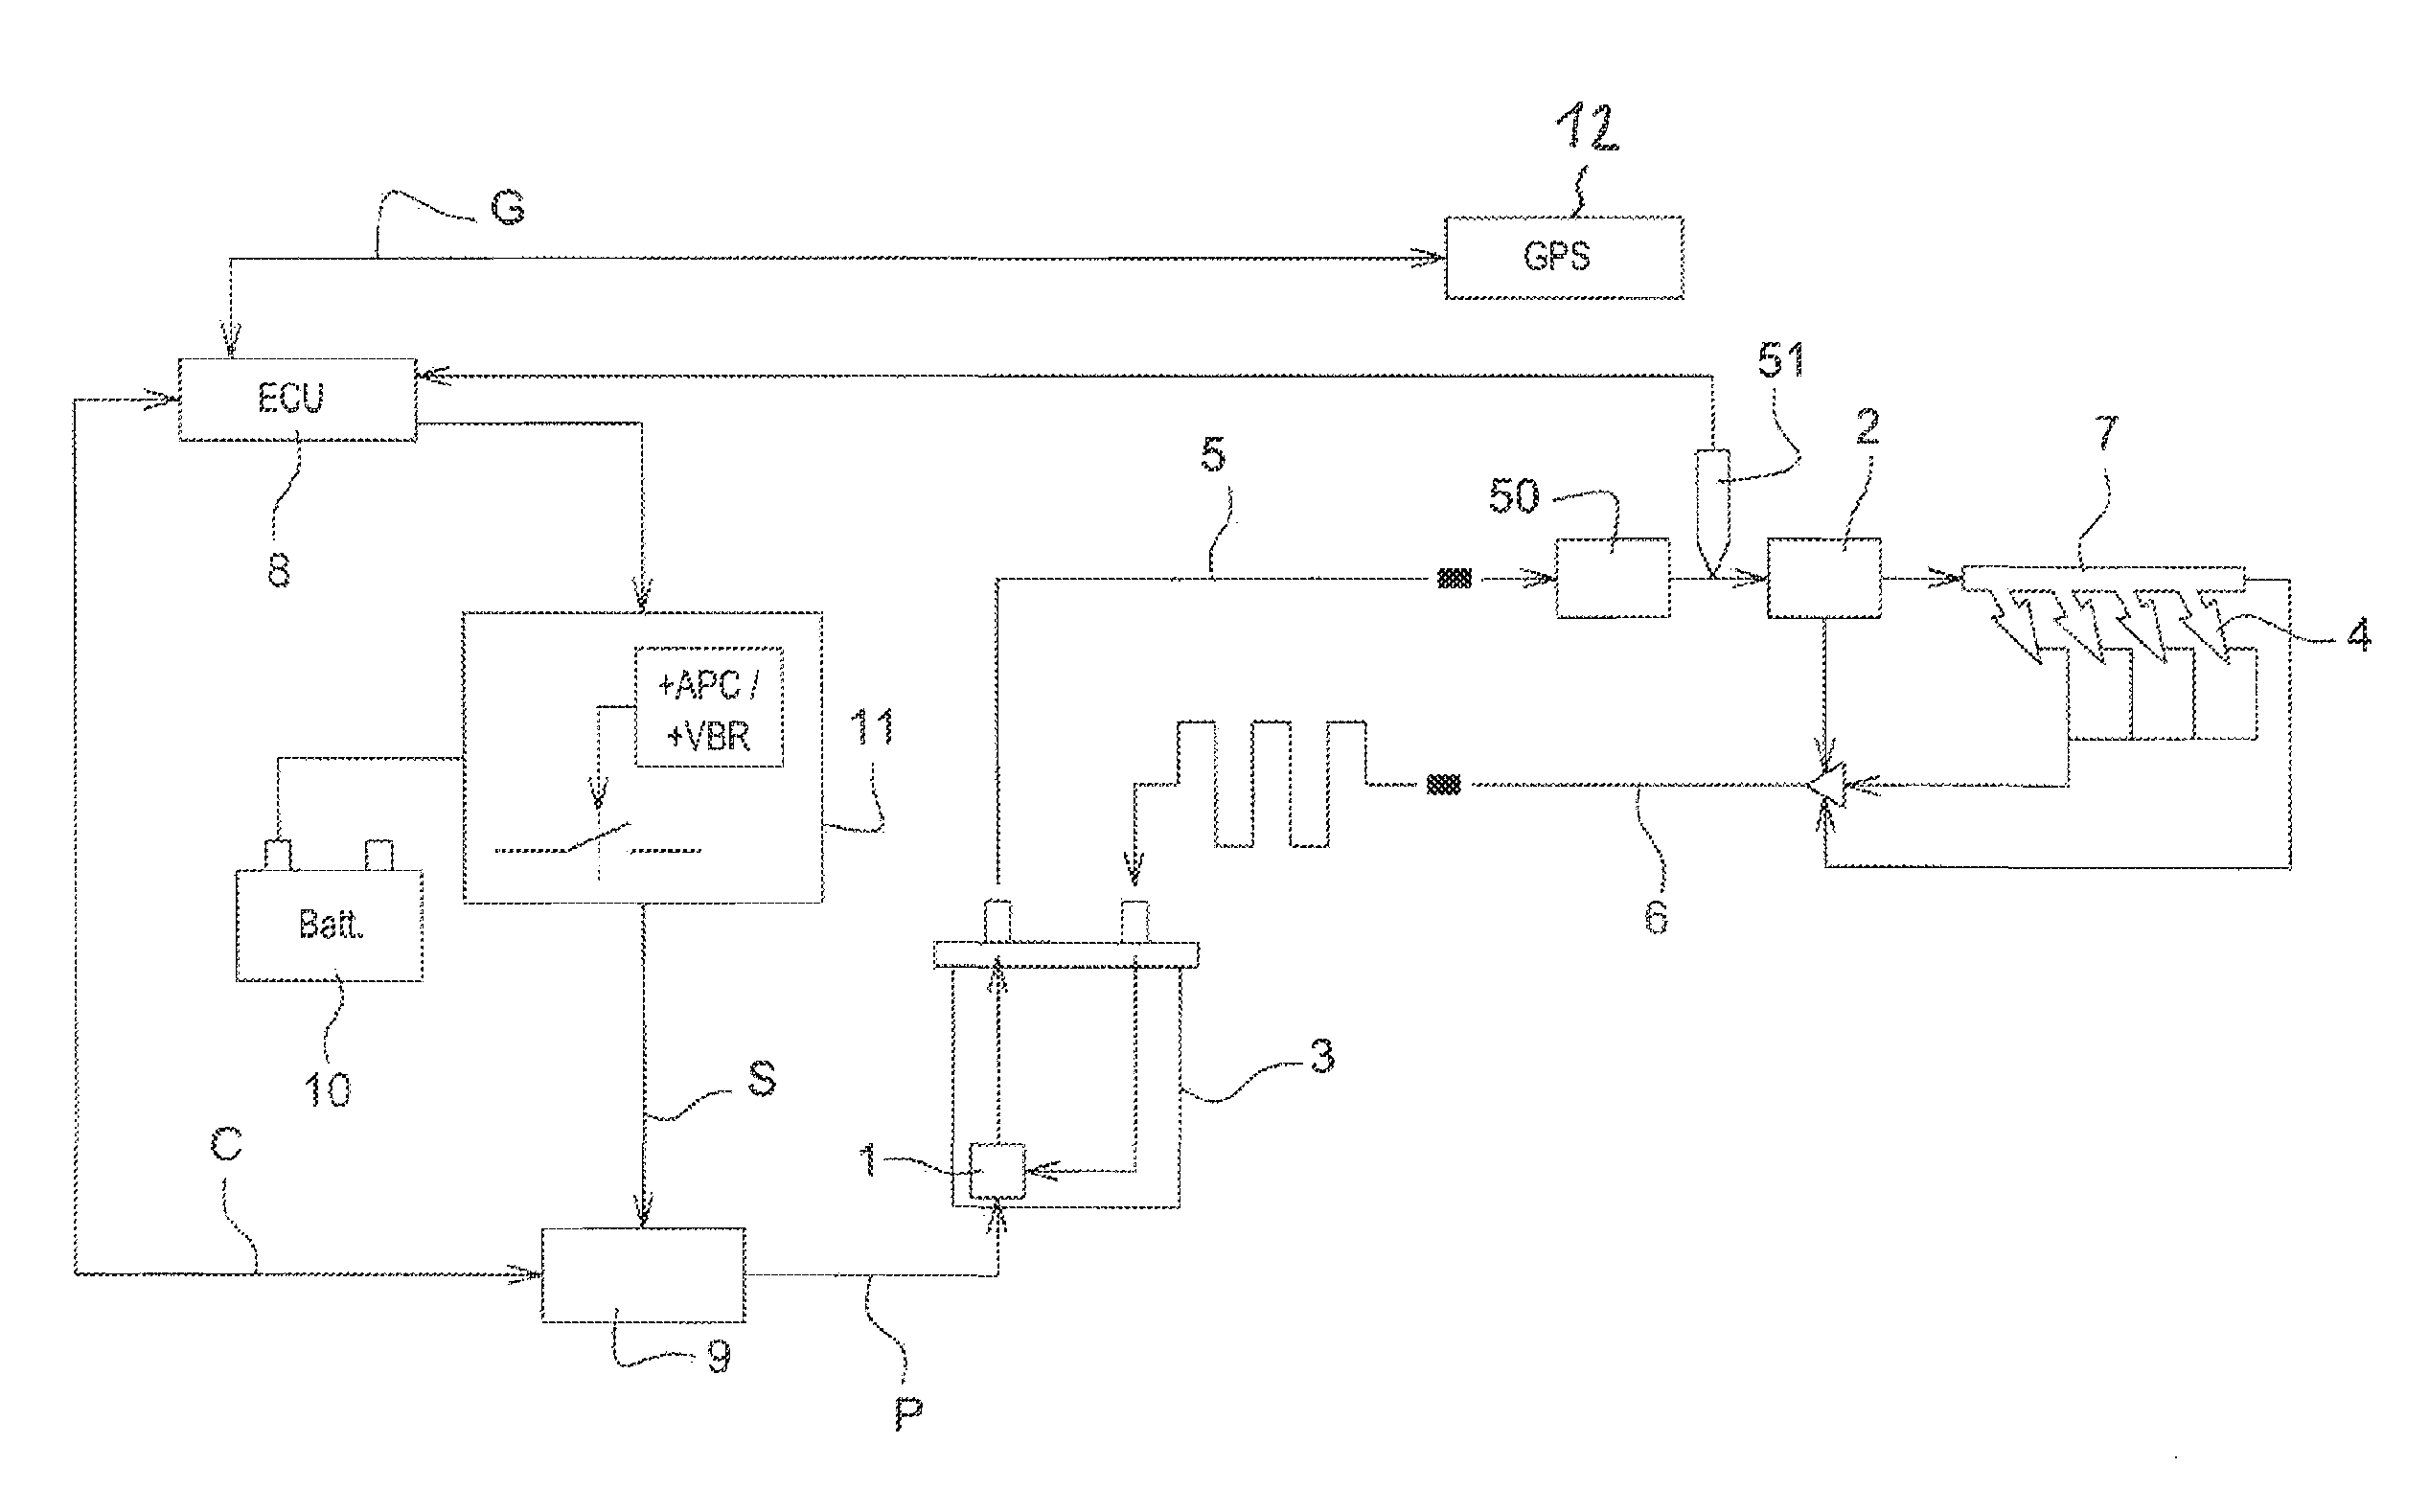 Method and system for supplying diesel to a motor vehicle